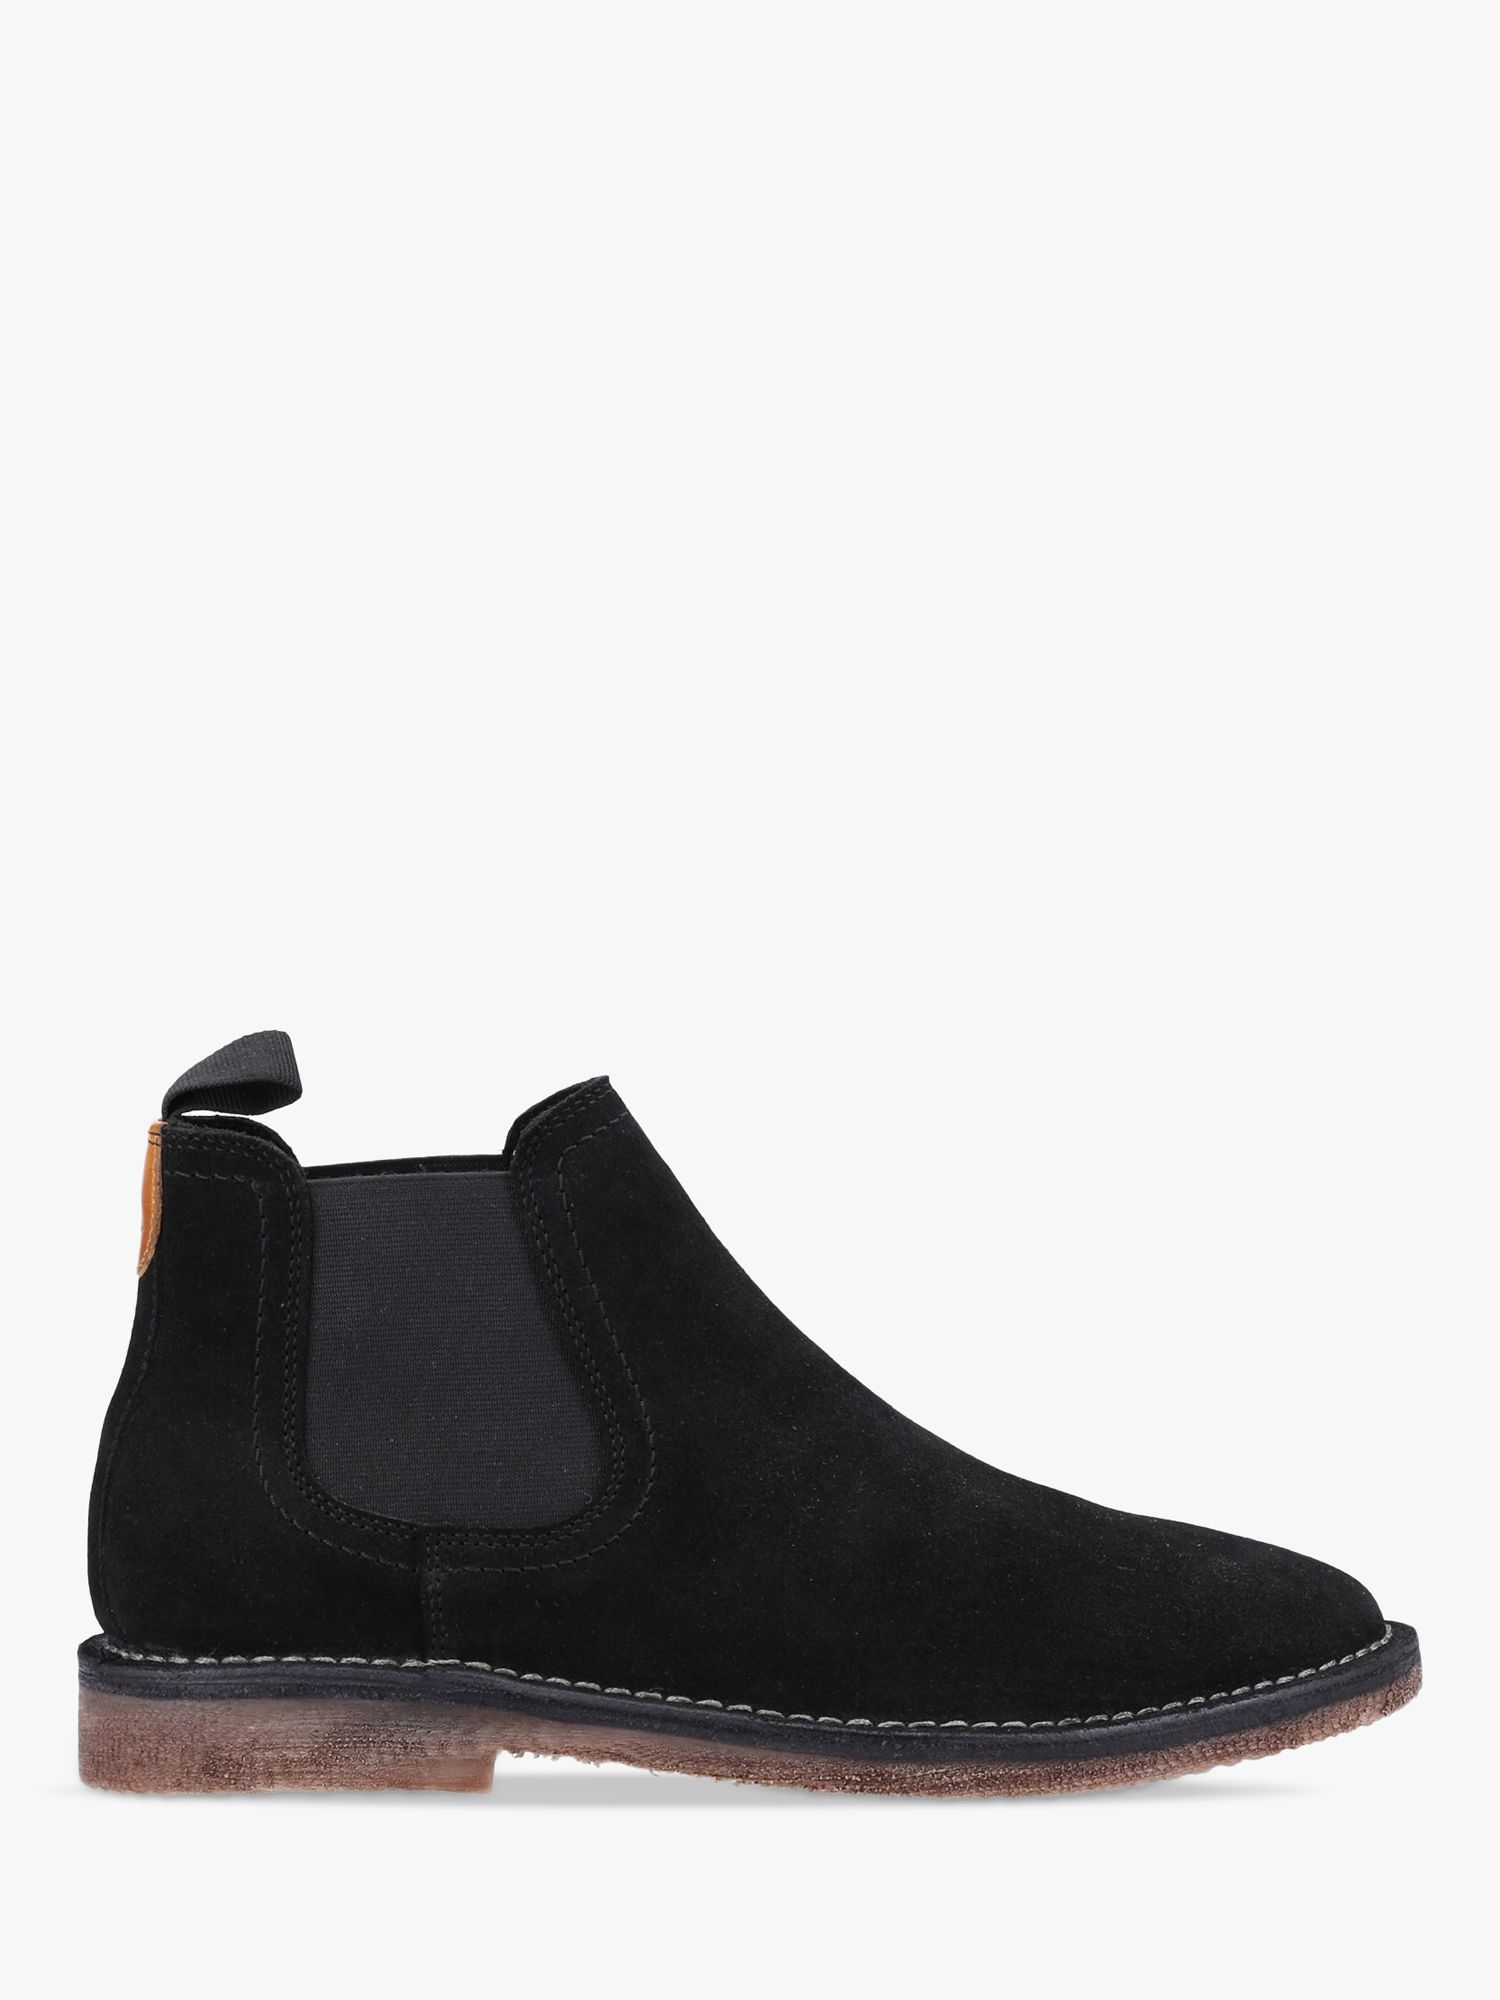 Hush Puppies Shaun Leather Chelsea Boots, Black at John Lewis & Partners